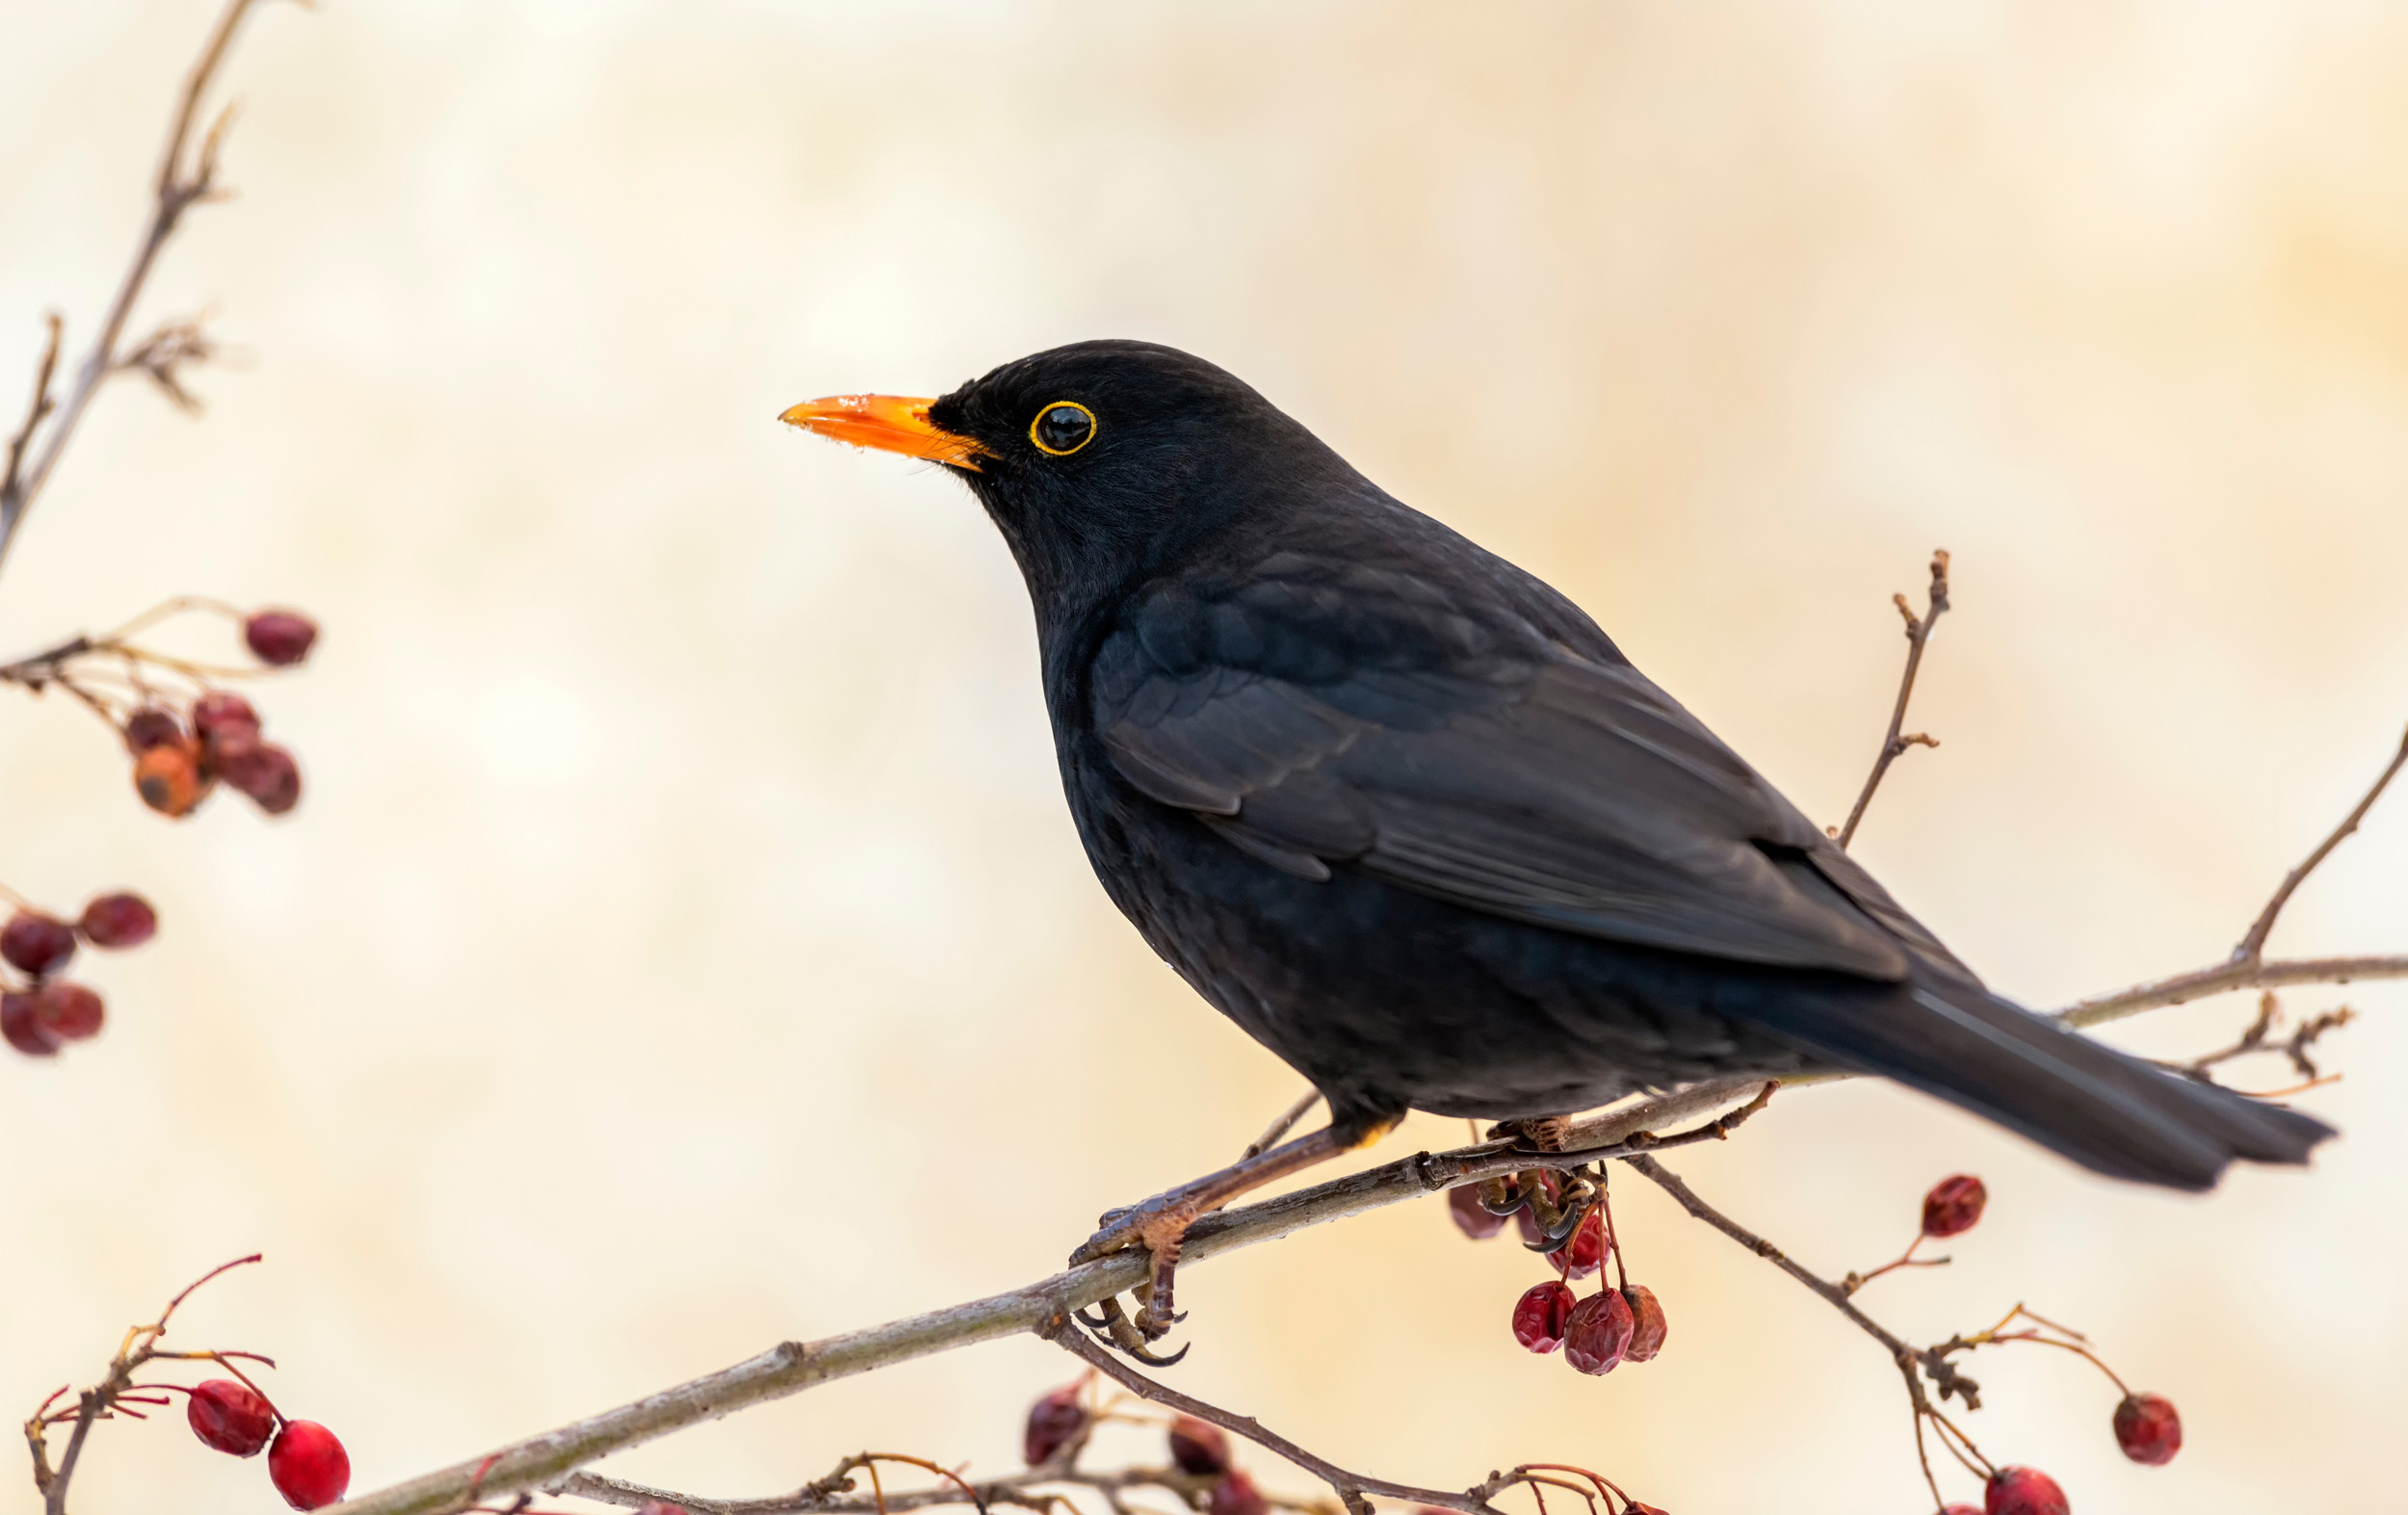 A lone Blackbird perched on a red berry covered branch.